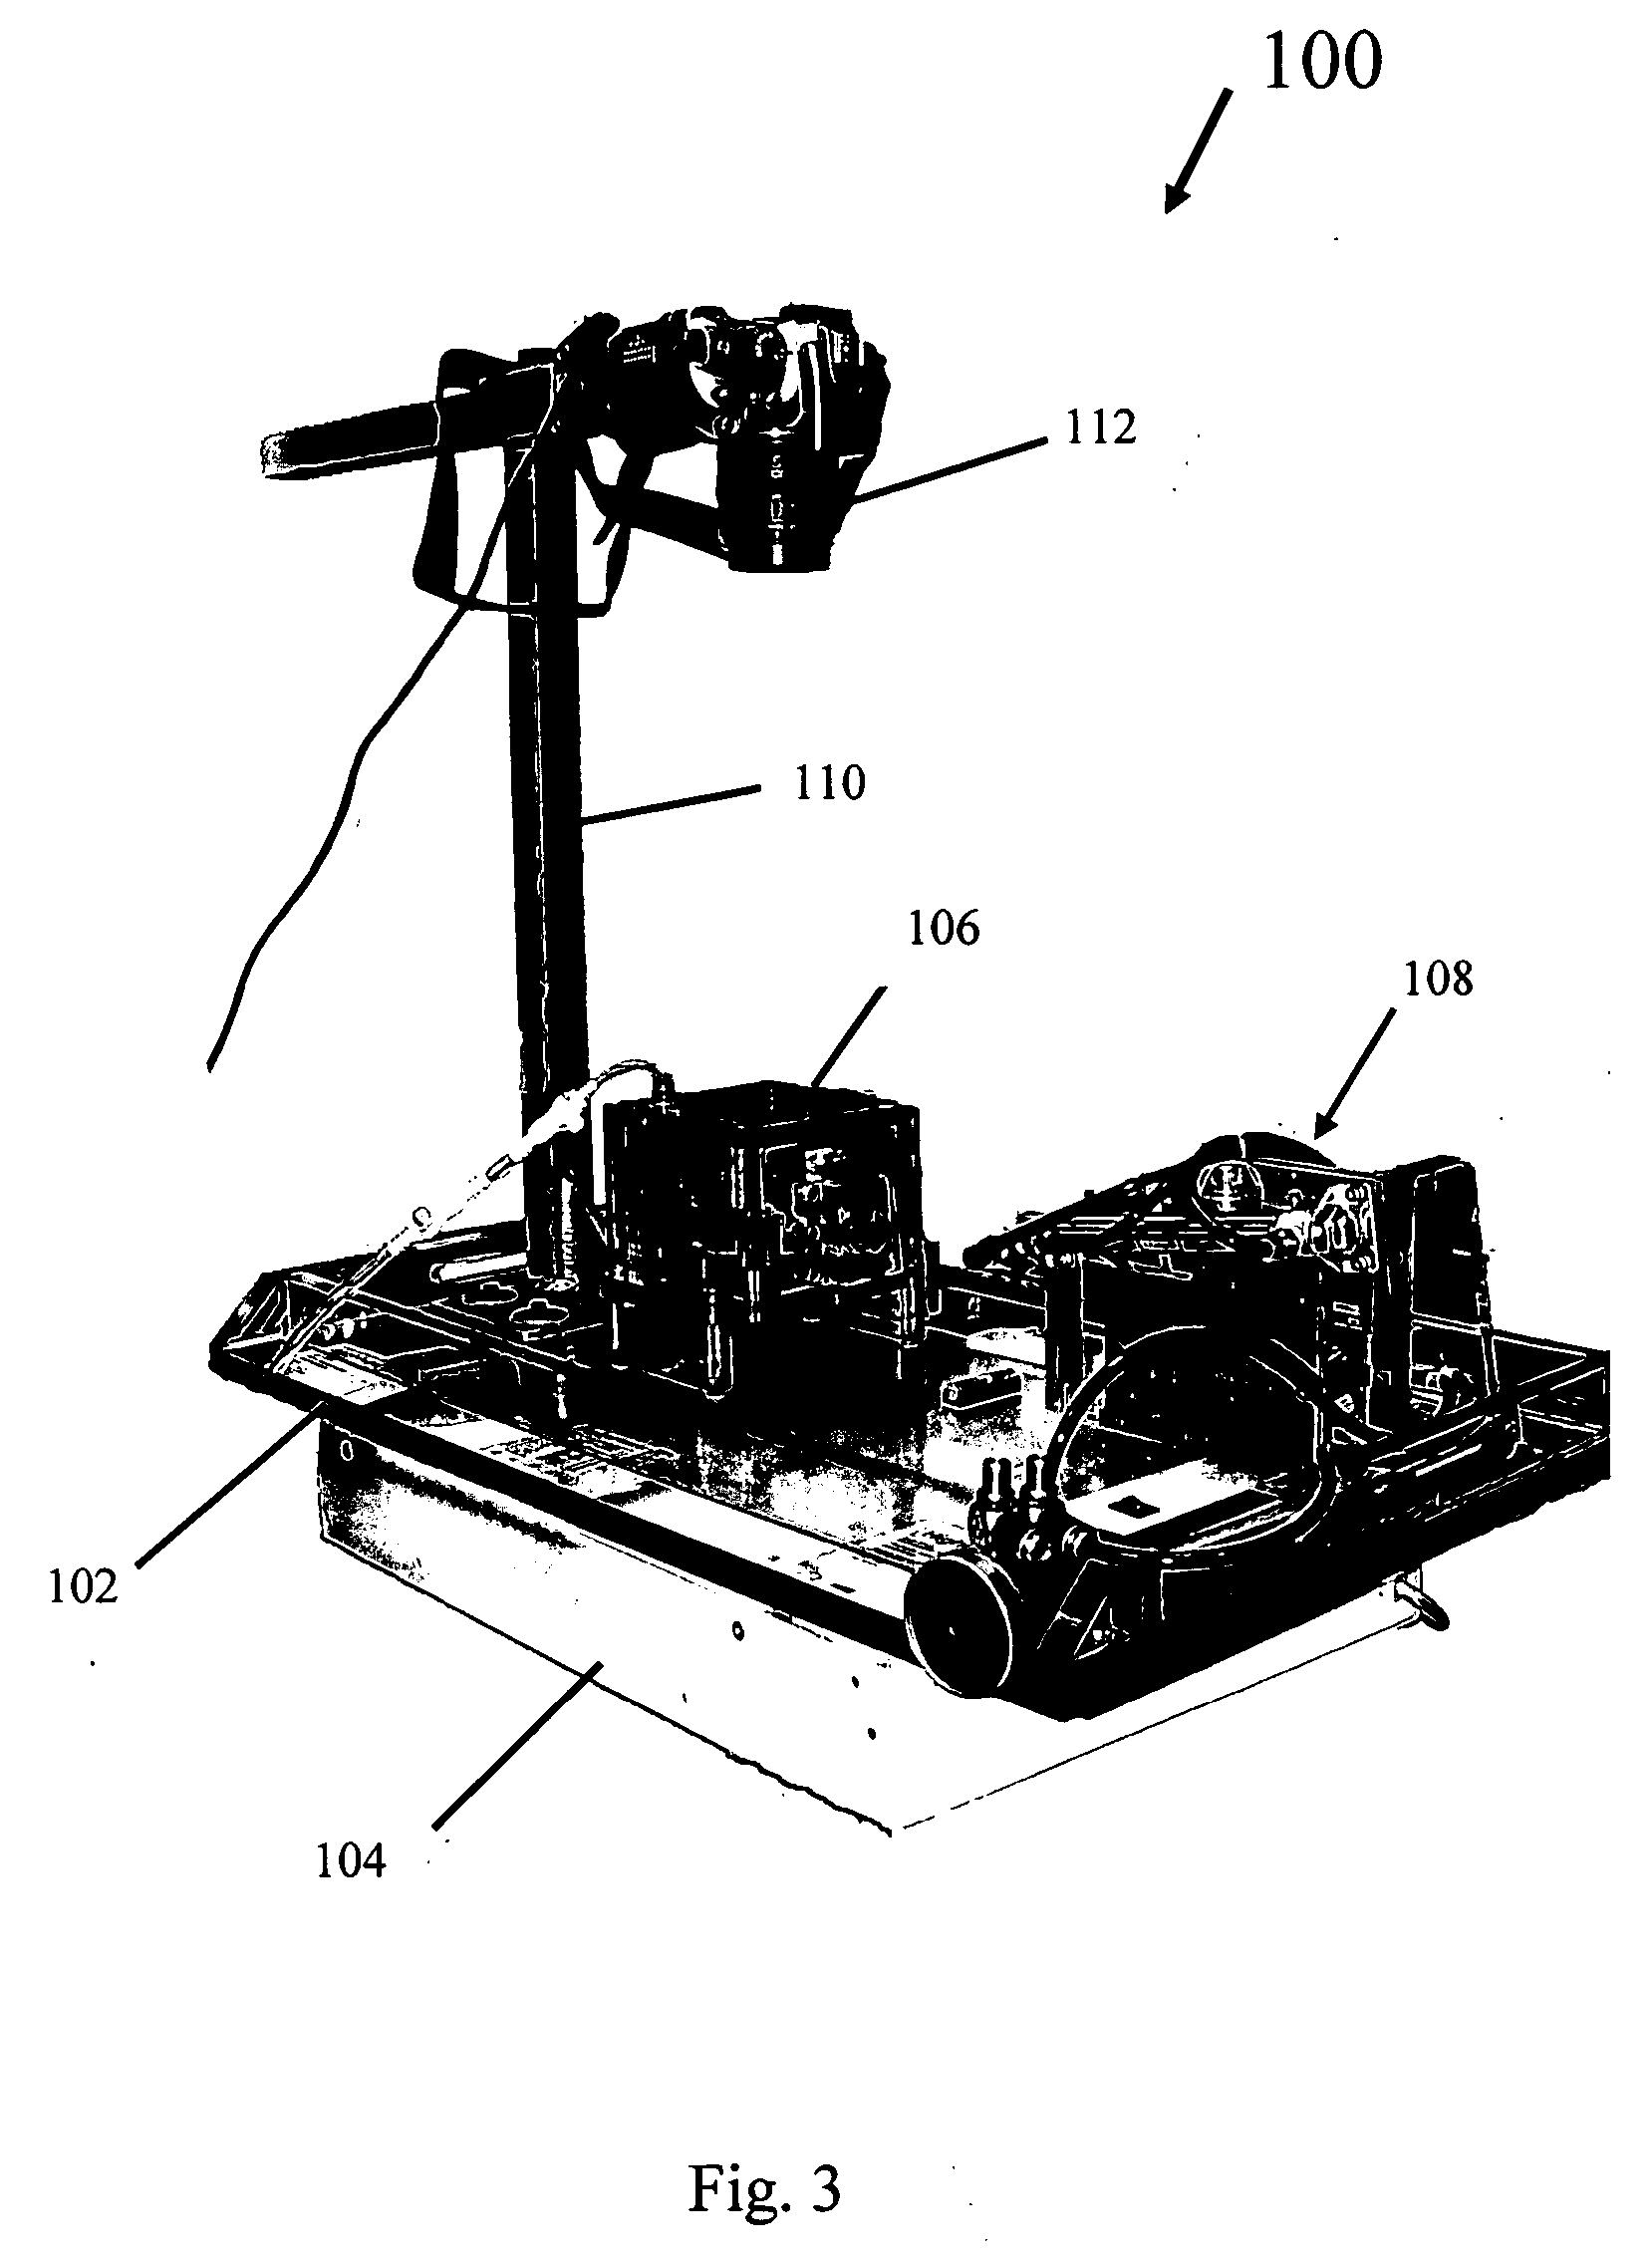 Apparatus for in vitro testing of tampon-and-applicator systems